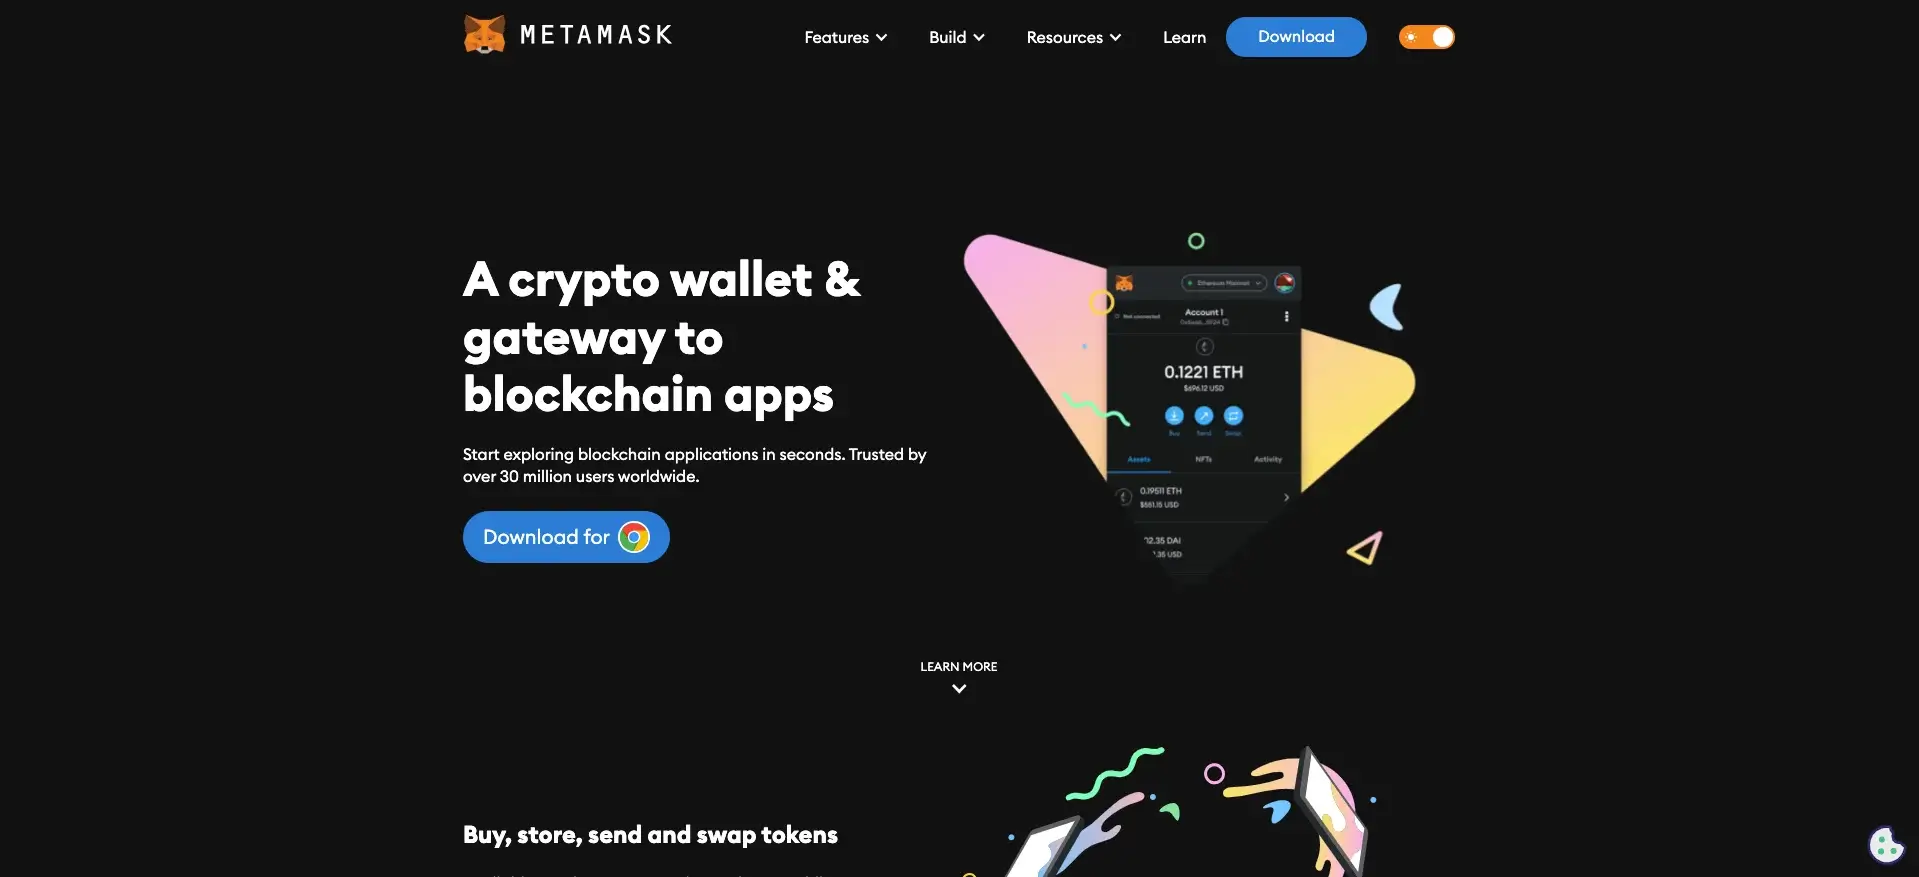 How to Add WETH to MetaMask Wallet?